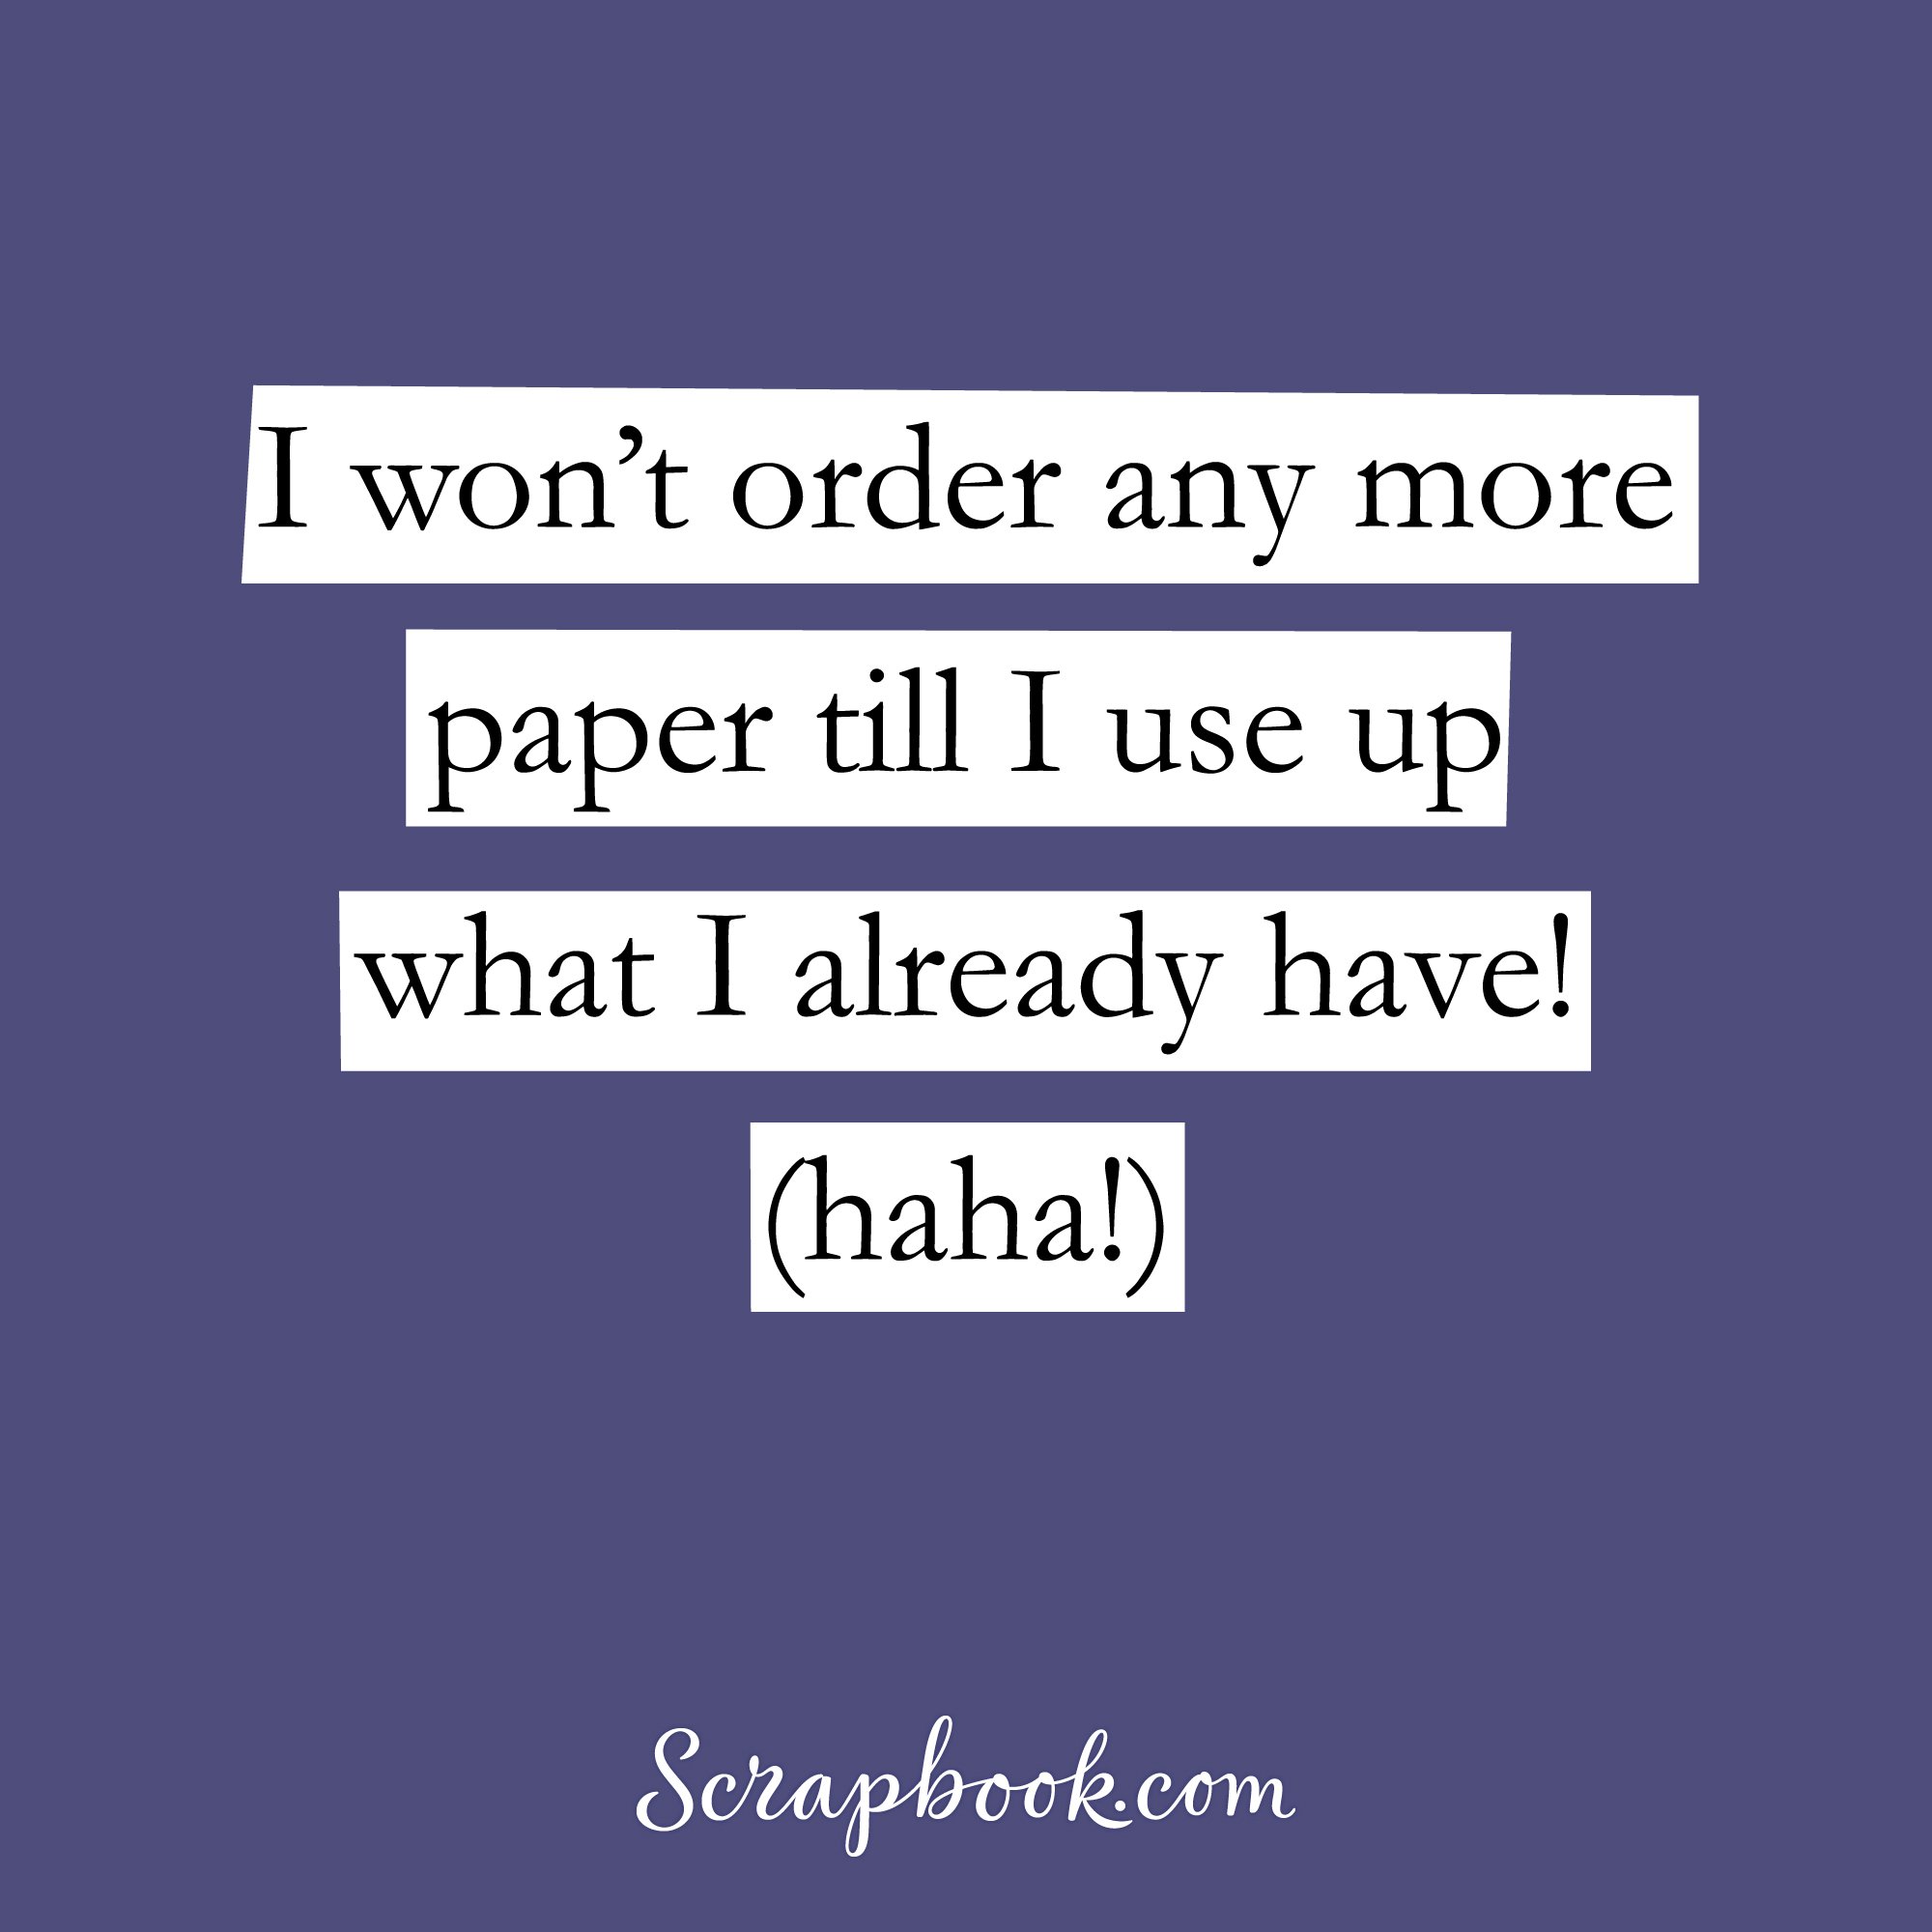 I won't order any more paper until I use up what I already have! (haha!) 